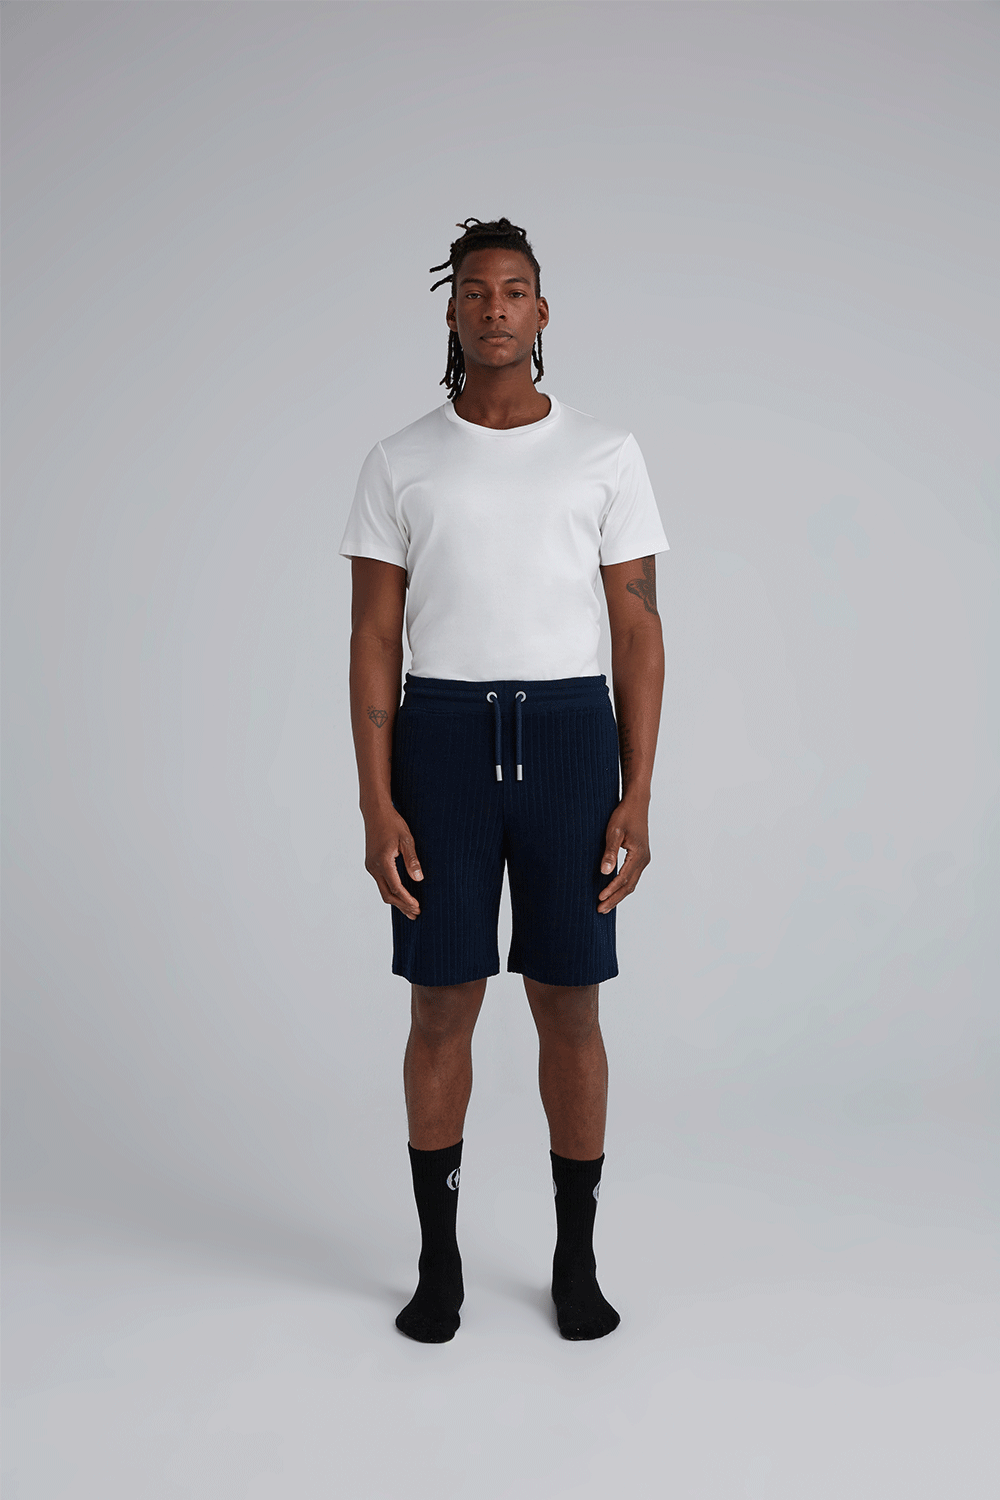 The Terry Shorts